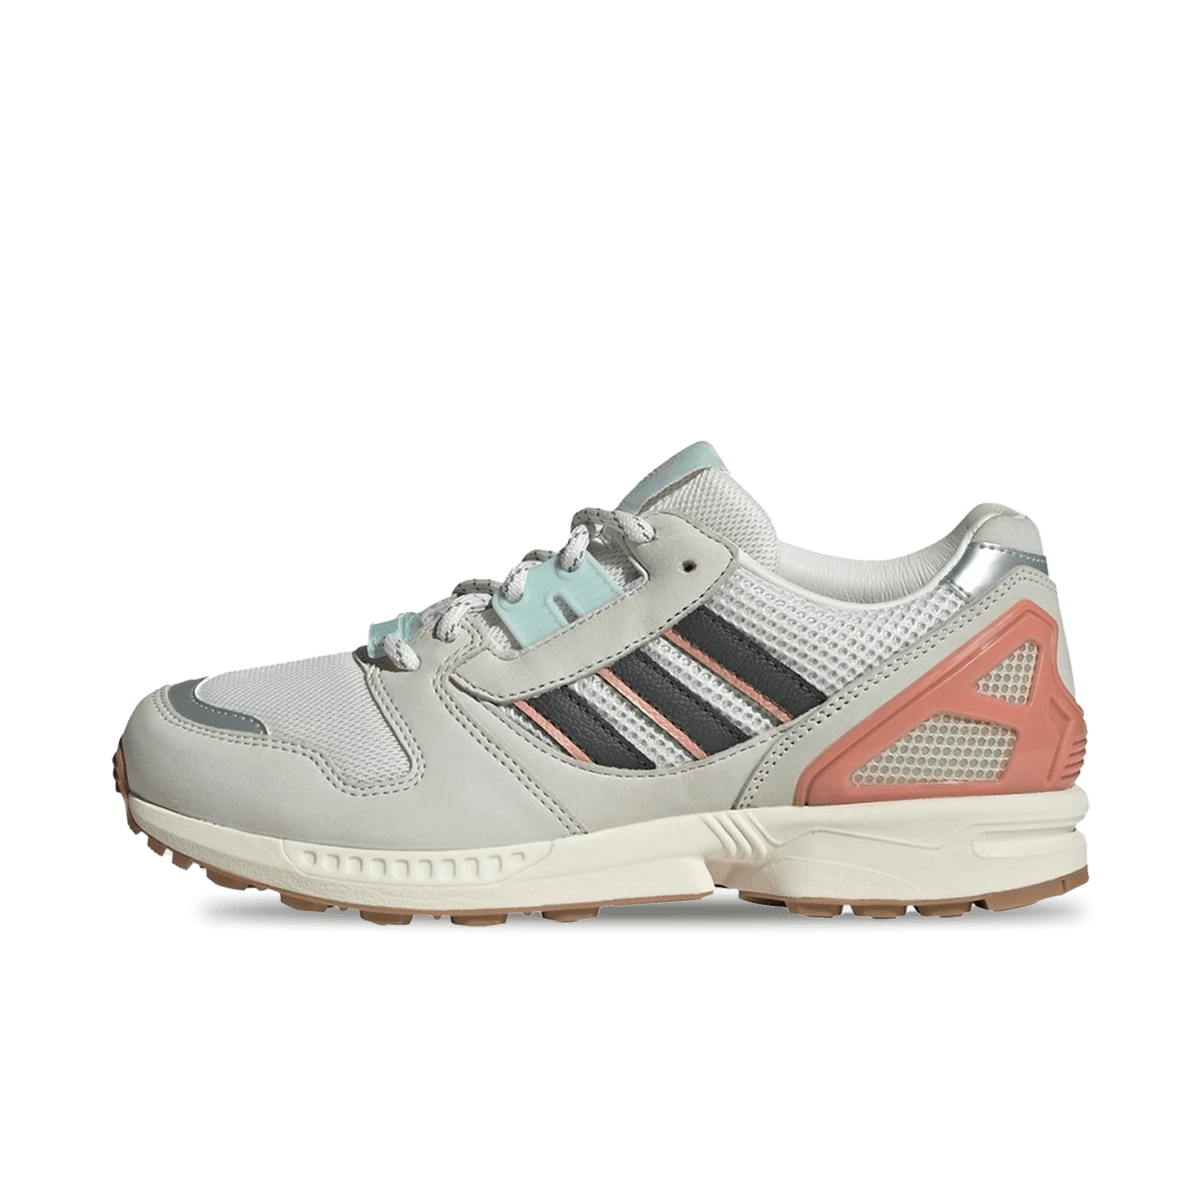 adidas ZX 8000 'Ice Mint' | IF5382 | The Drop Date